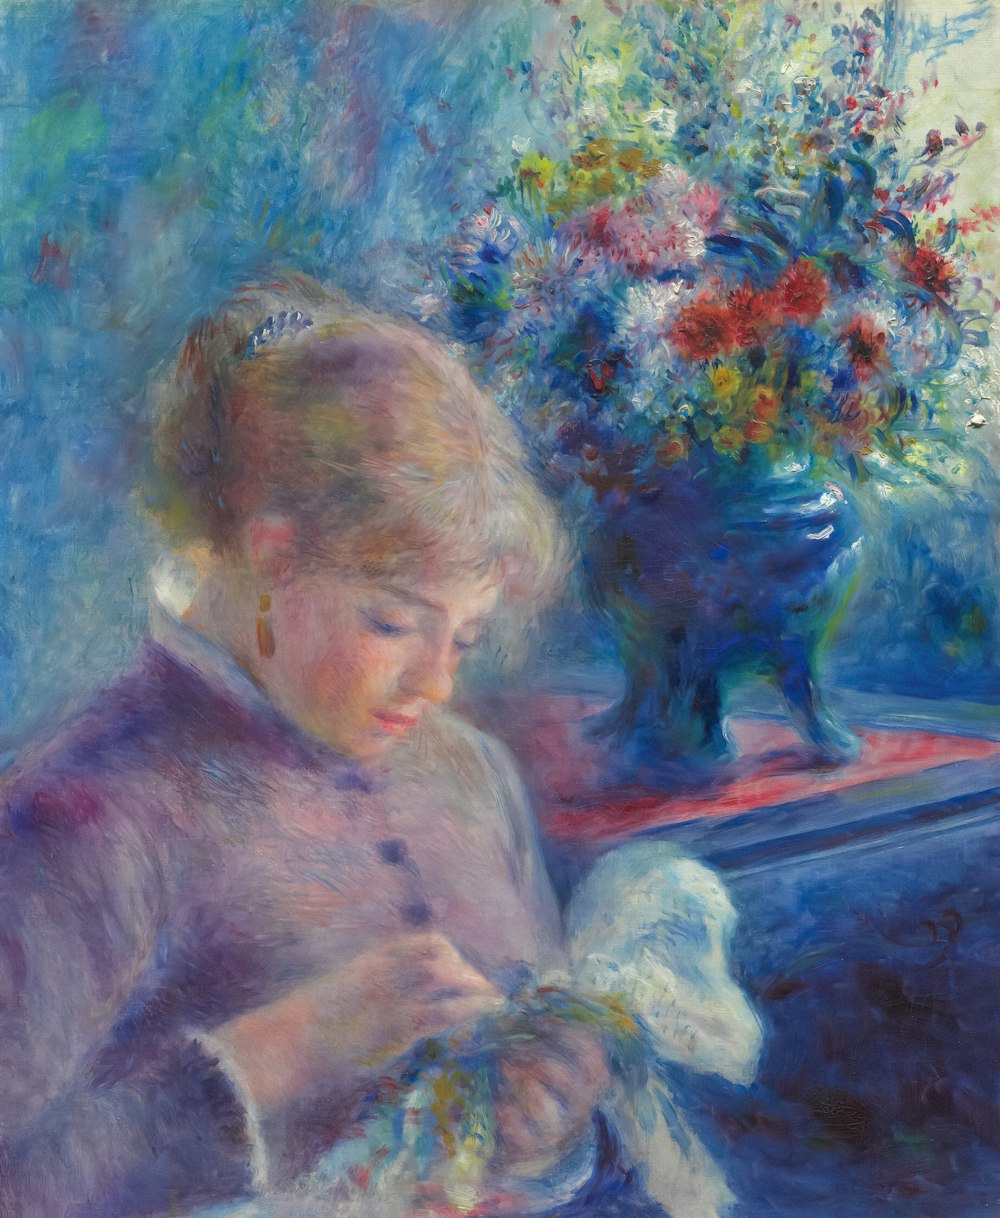 a painting of a woman sitting in front of a window